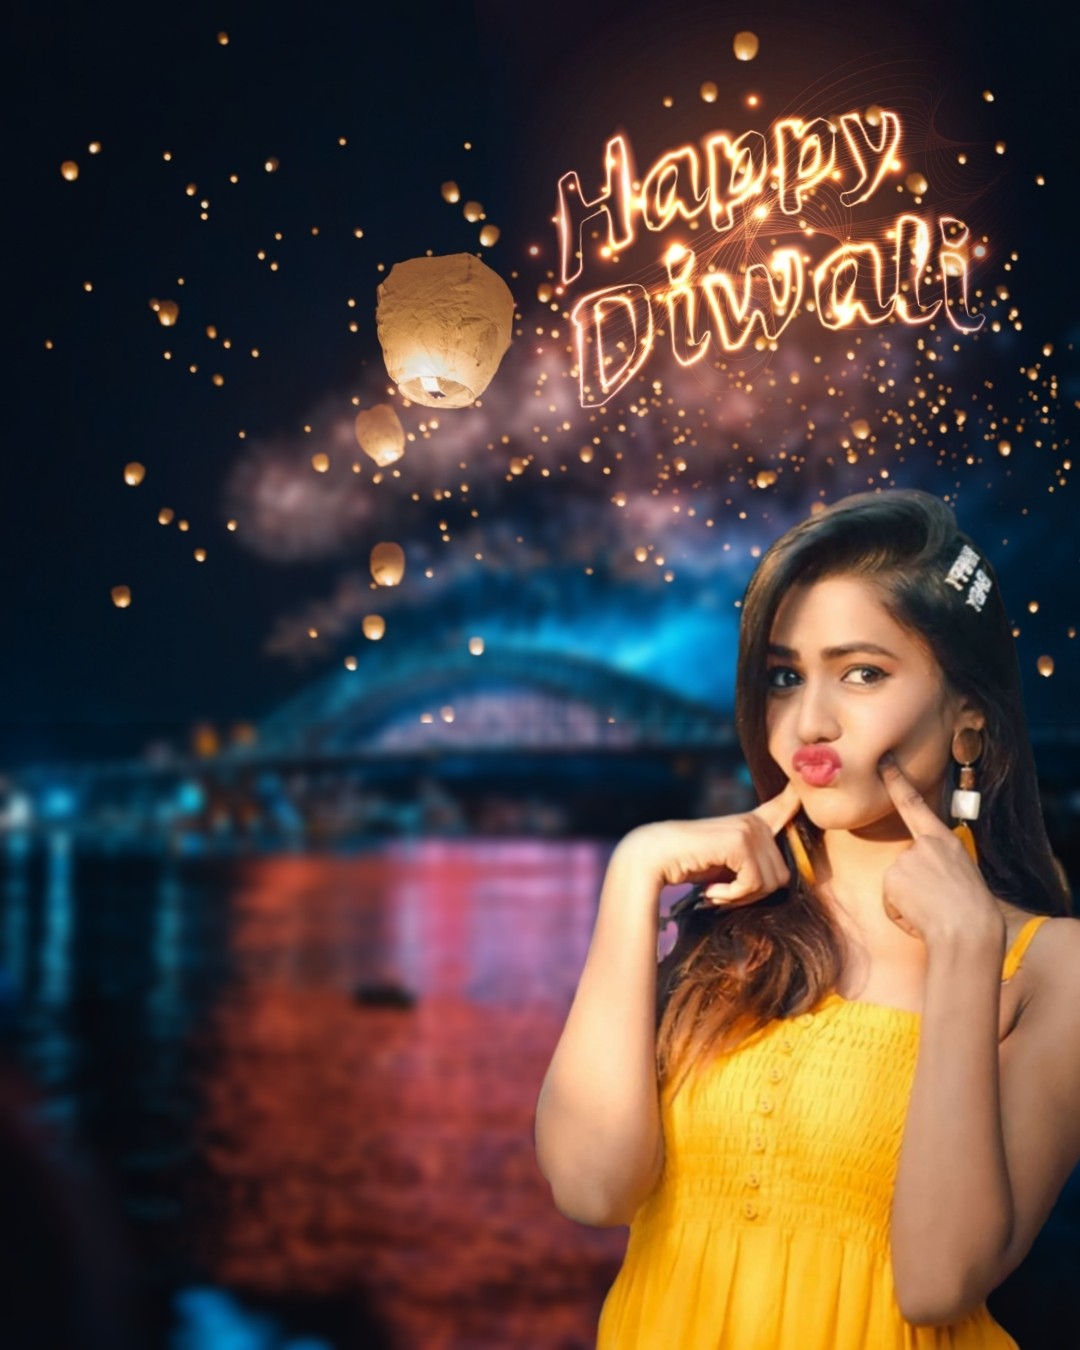 Diwali girl editing background Total PNG | Free Stock Photos